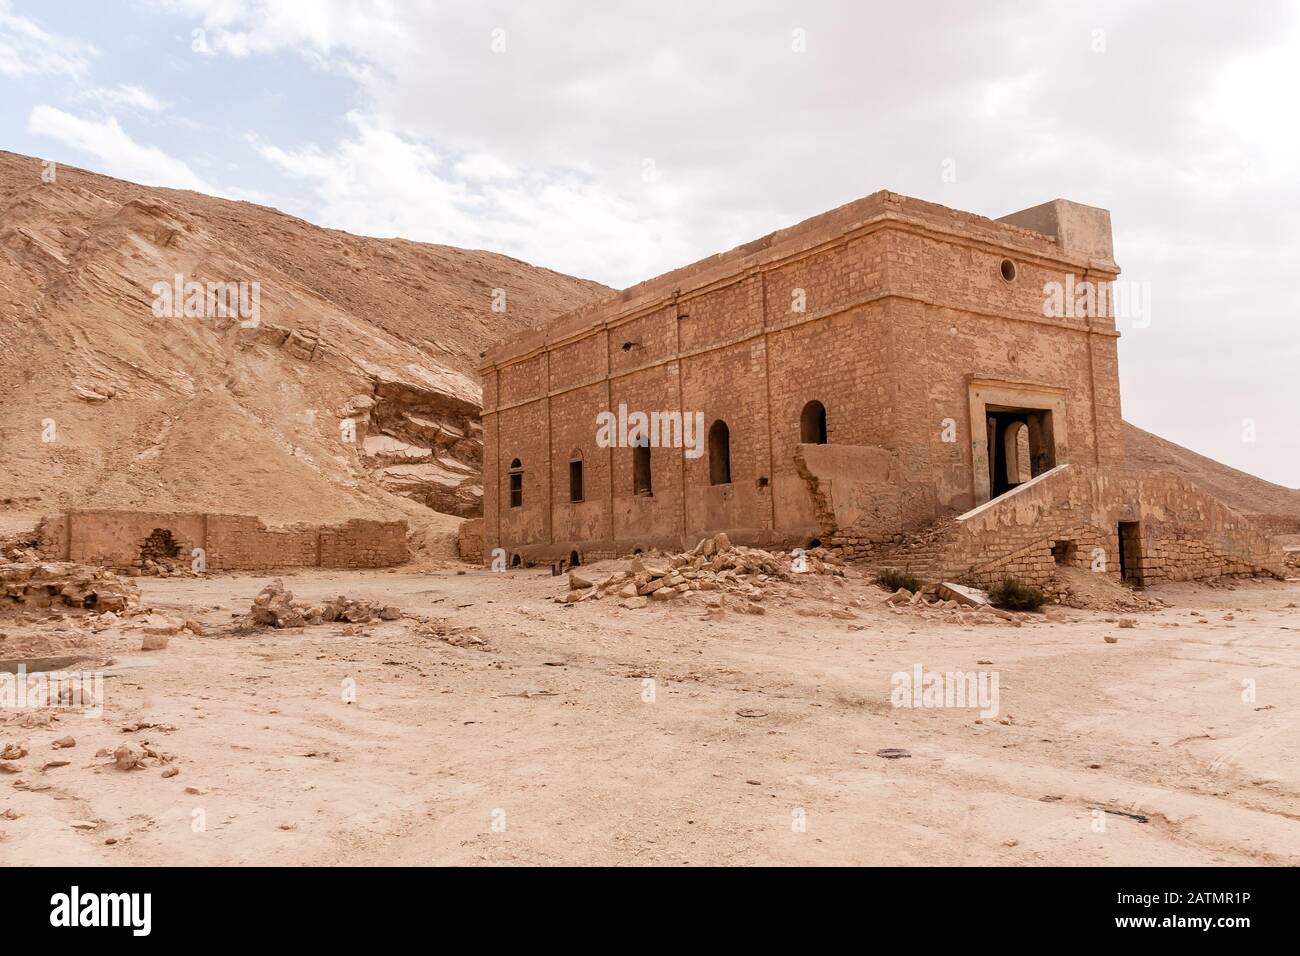 Buildings of the abandoned and dilapidated surface water collecting and treatment plant in Khafs Daghrah, Saudi Arabia Stock Photo